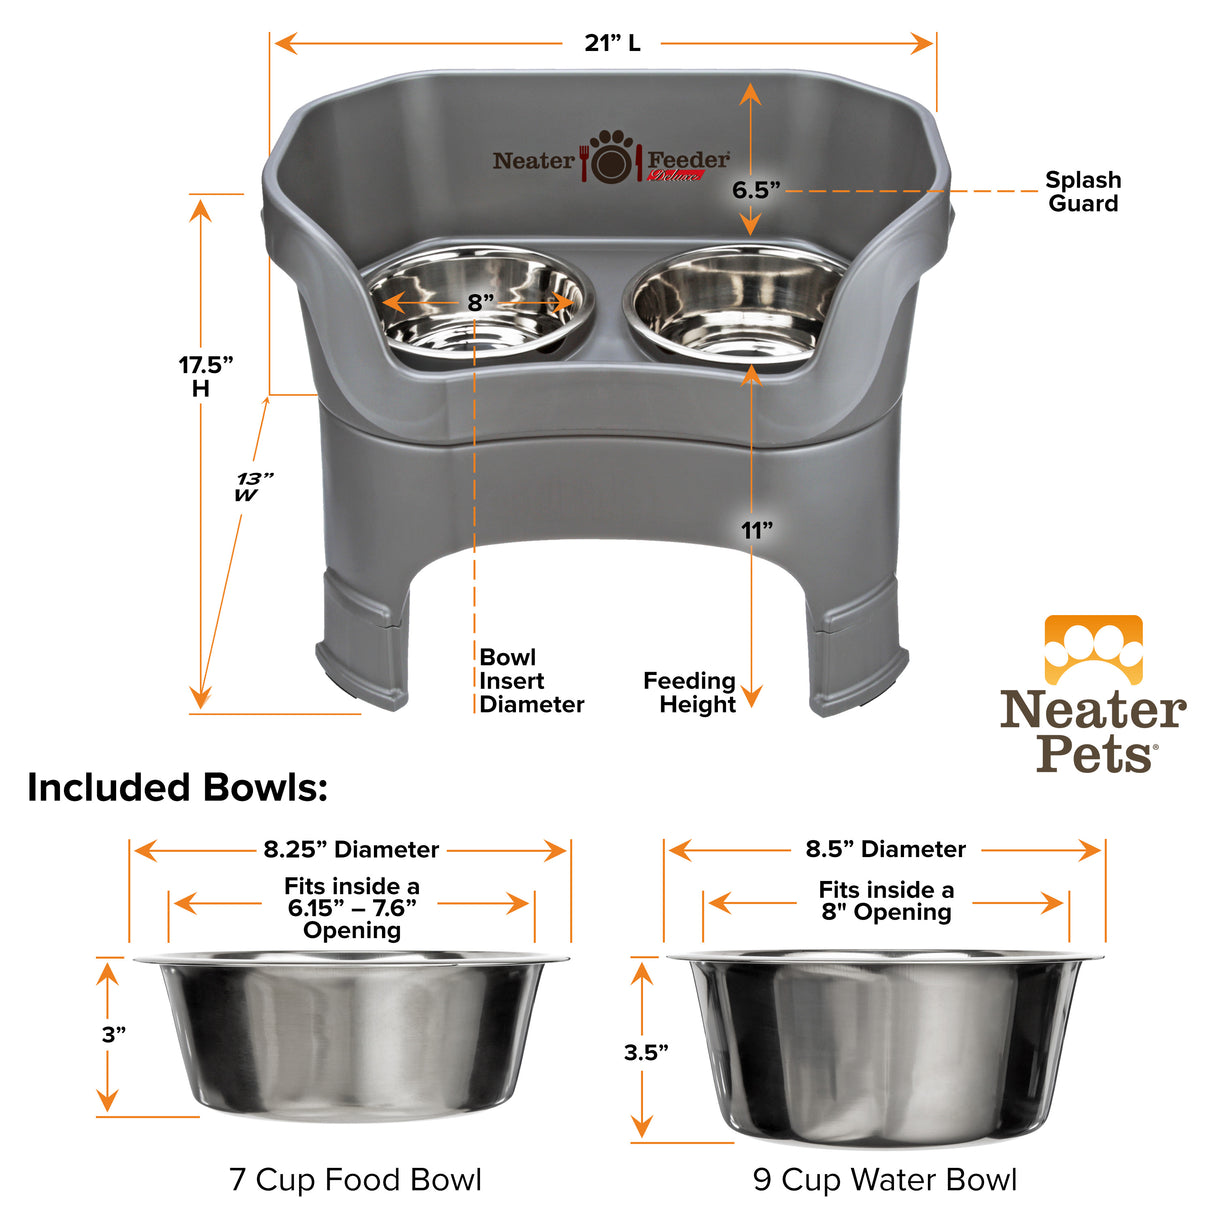 Deluxe Gunmetal Grey Large Dog Neater Feeder with leg extensions and Bowl dimensions